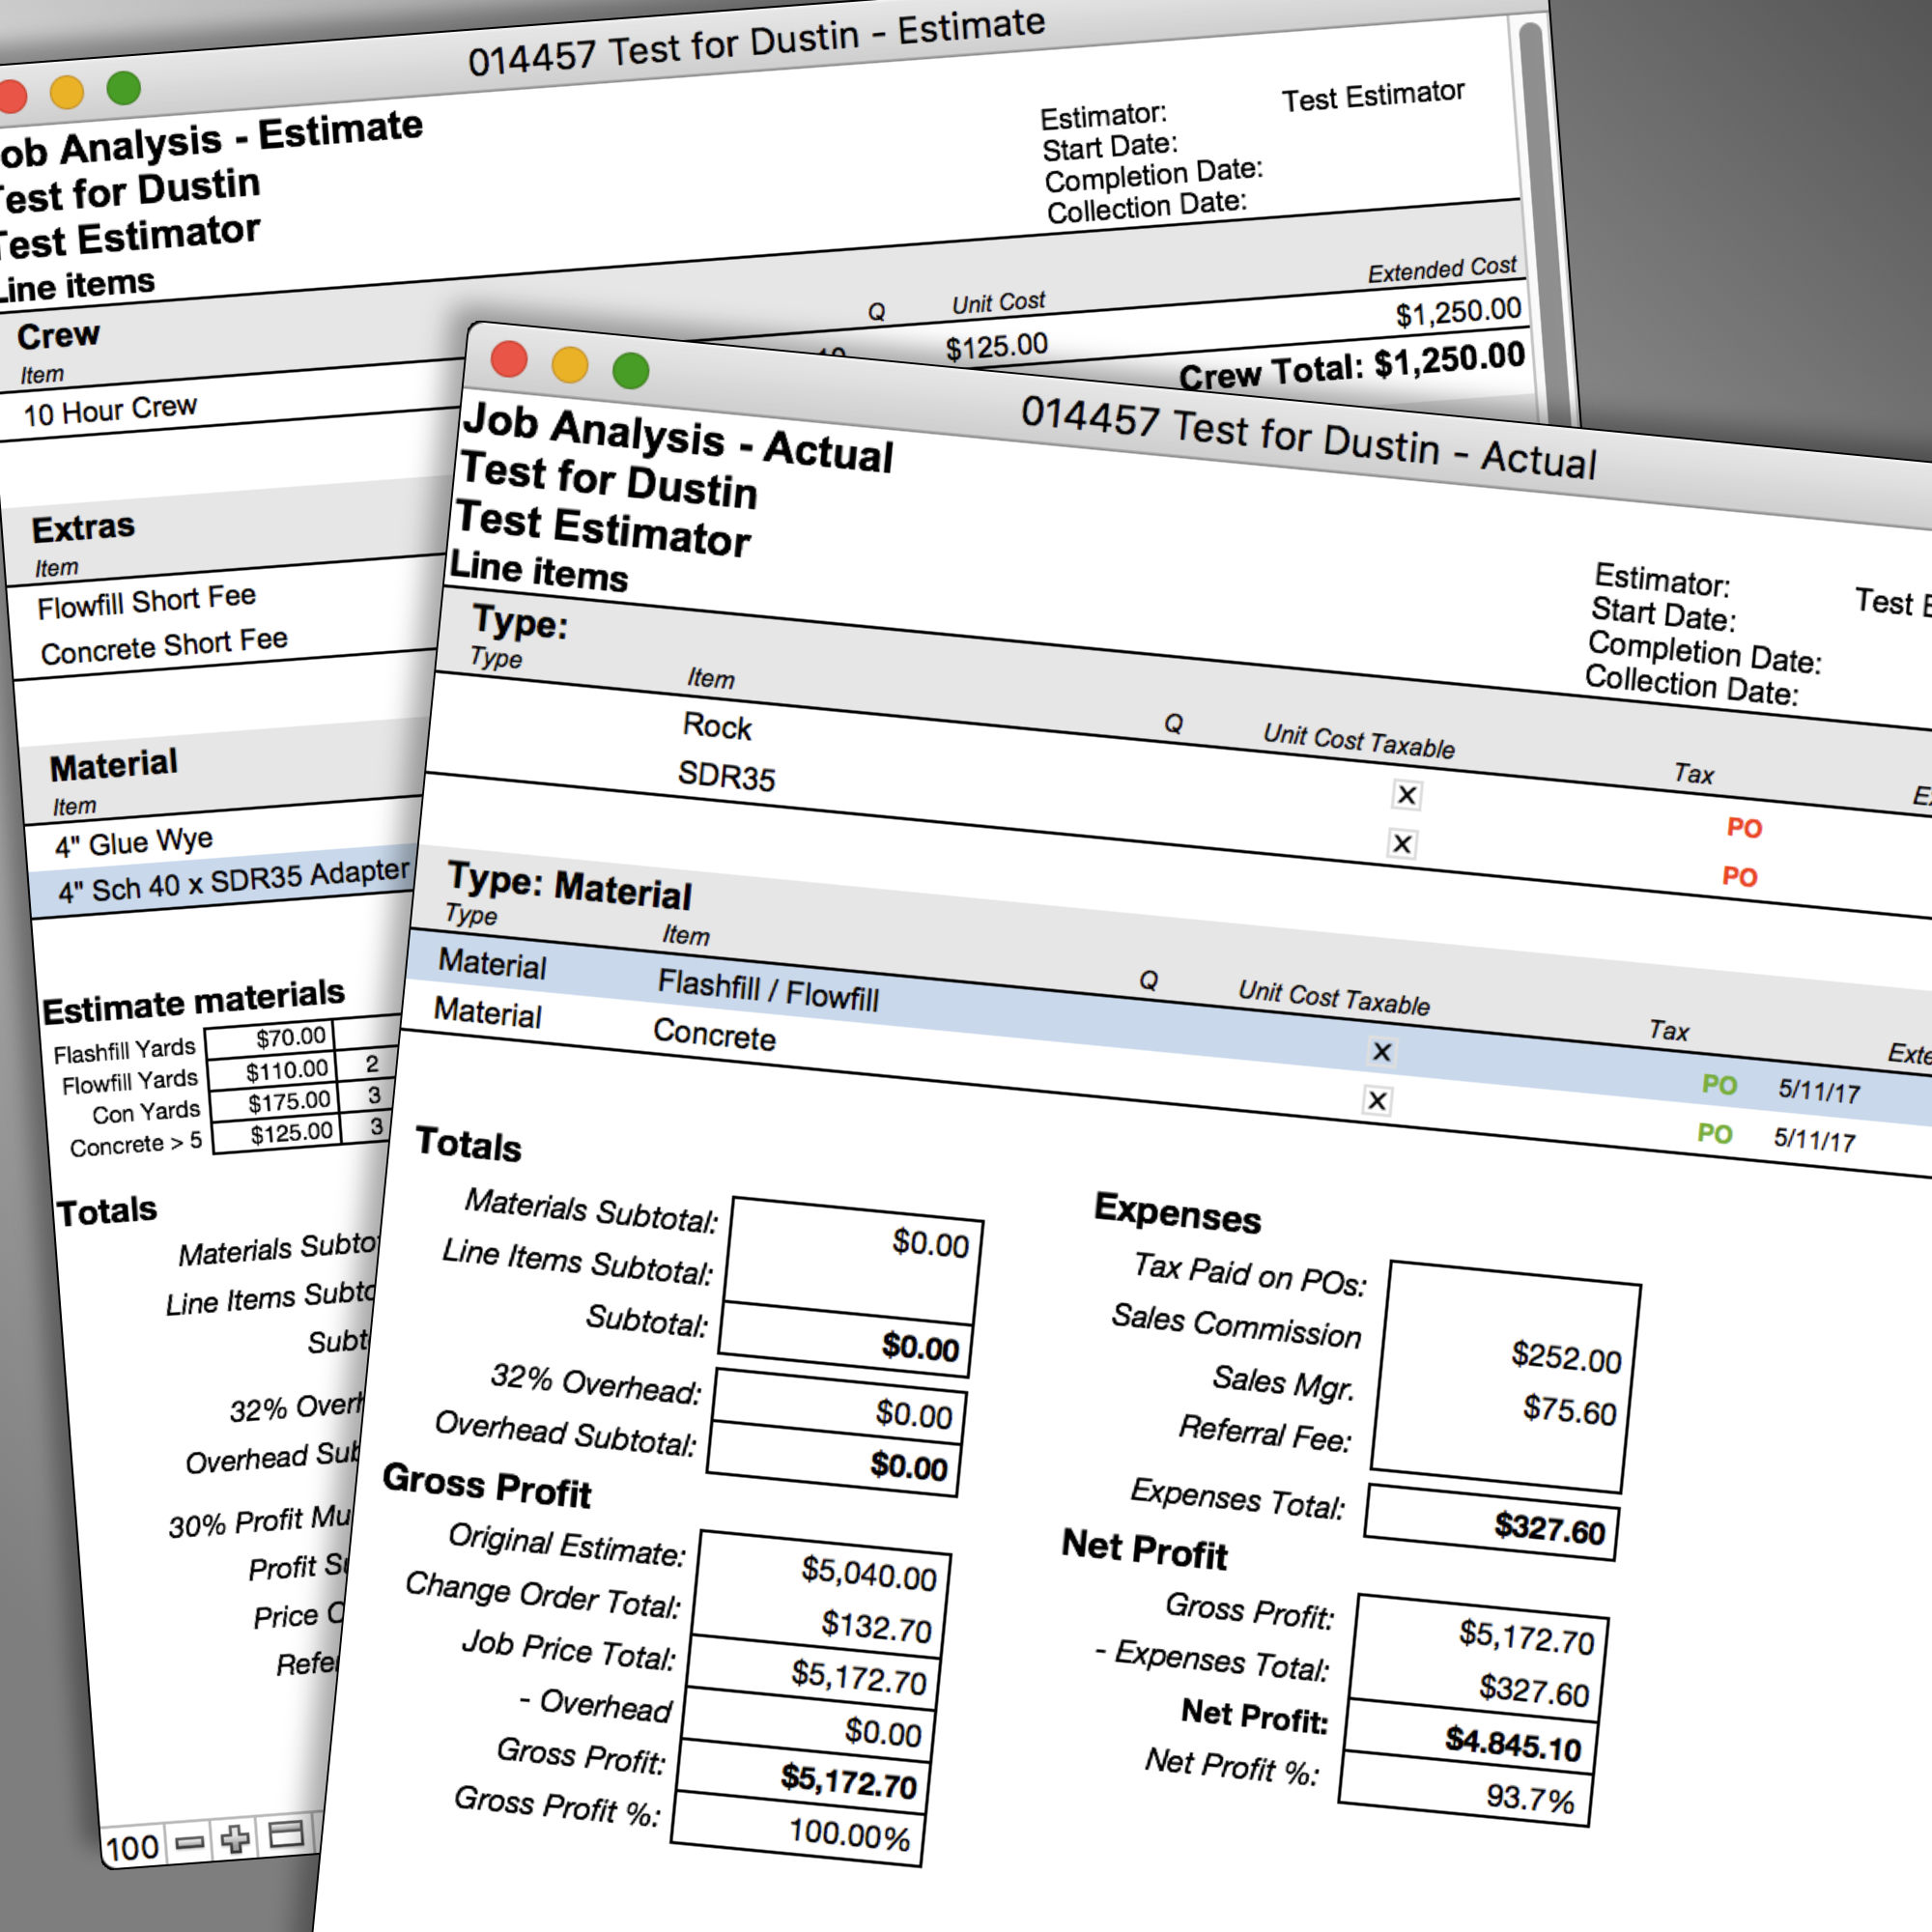 Are you continually buried in spreadsheets? FileMaker can generate detailed analysis of your sales and costs.